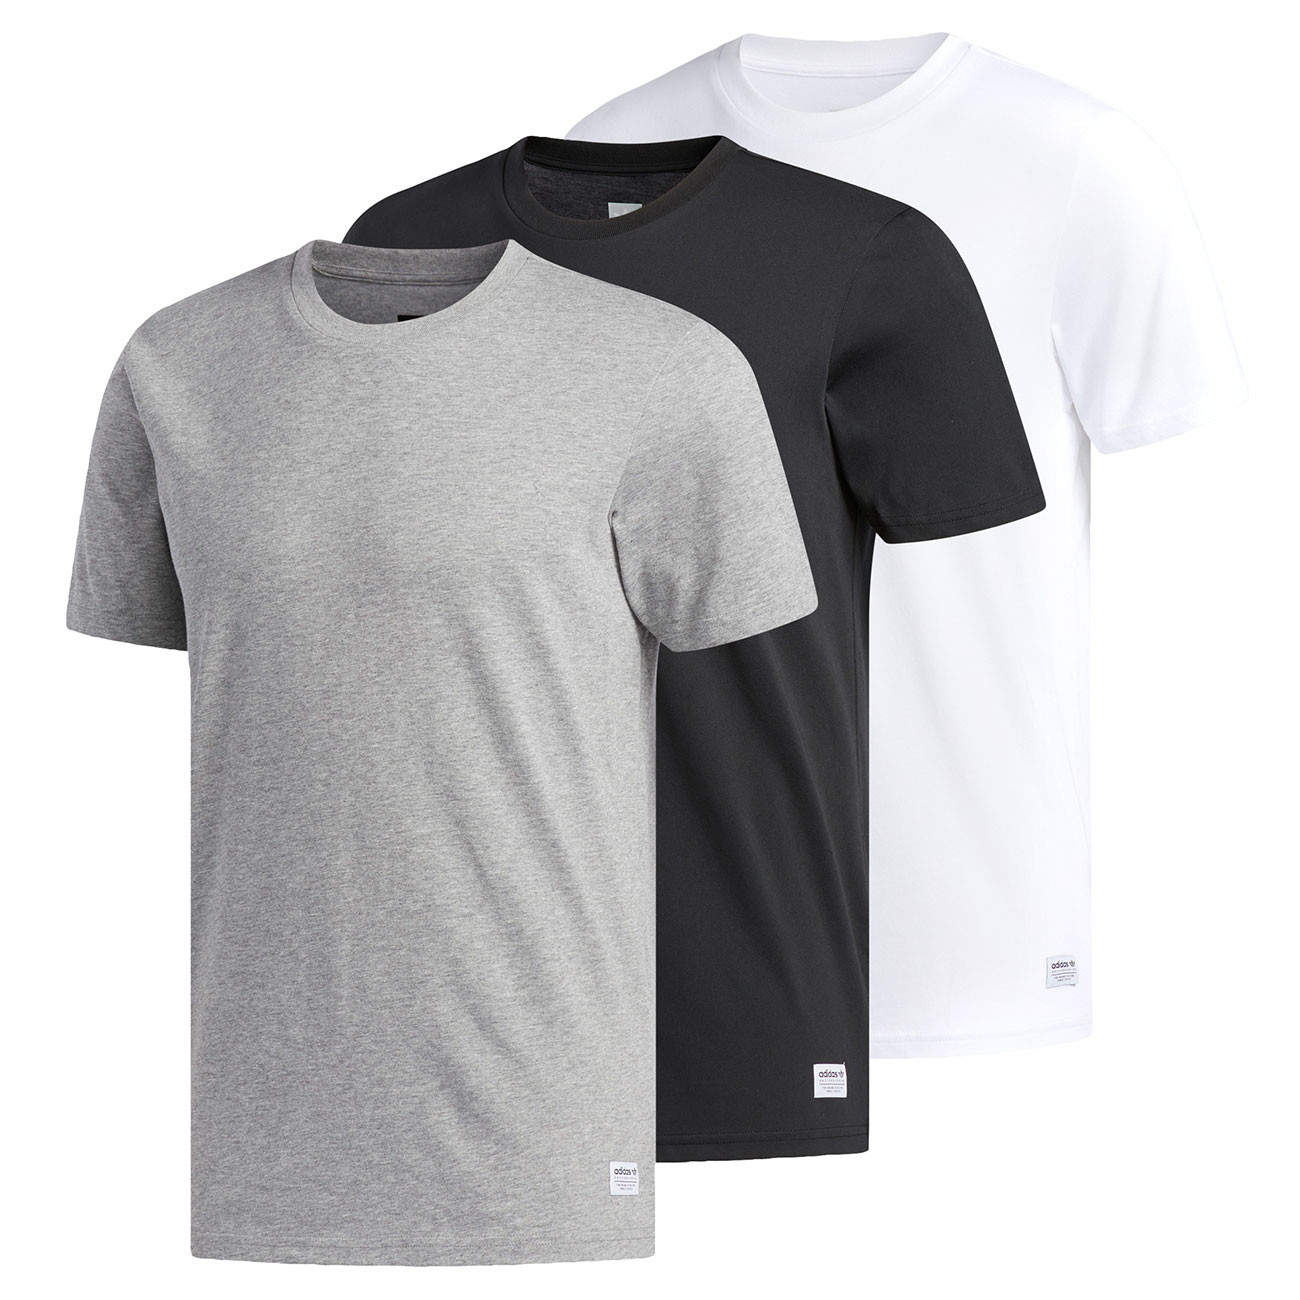 adidas pack of 3 t shirts